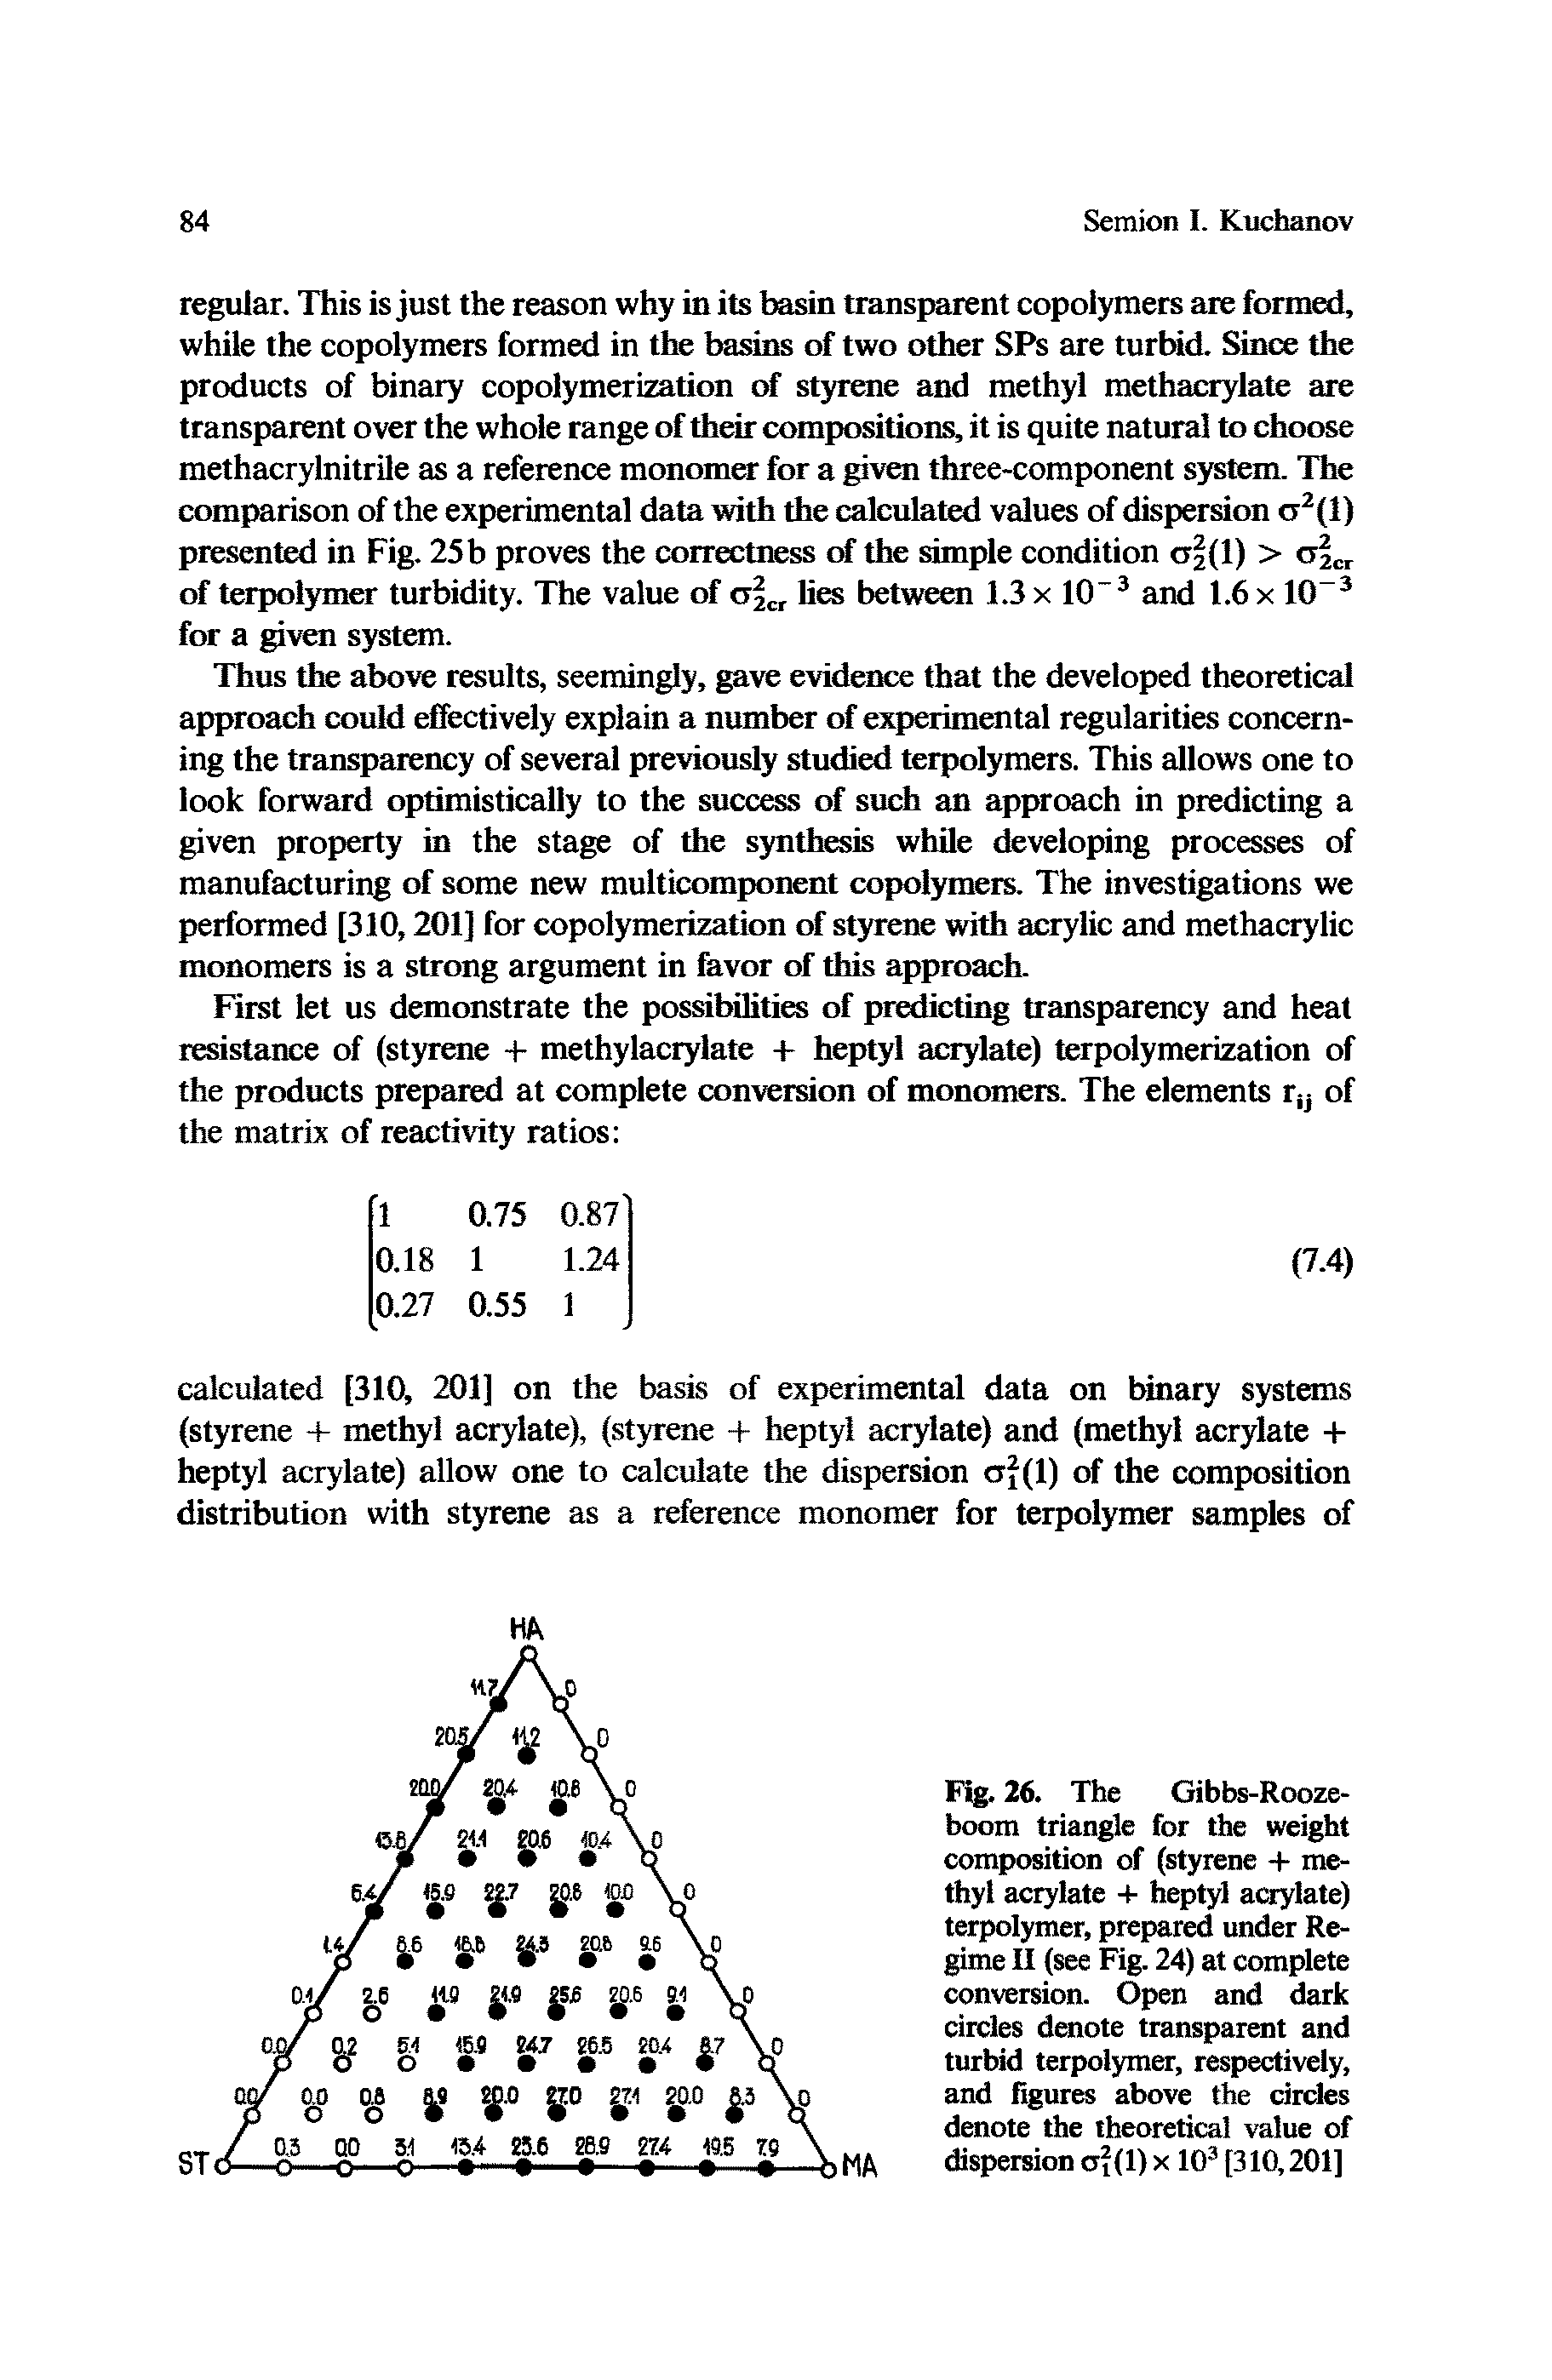 Fig. 26. The Gibbs-Rooze-boom triangle for the weight composition of (styrene + methyl acrylate + heptyl acrylate) terpolymer, prepared under Regime II (see Fig. 24) at complete conversion. Open and dark circles denote transparent and turbid terpolymer, respectively, and figures above the circles denote the theoretical value of...